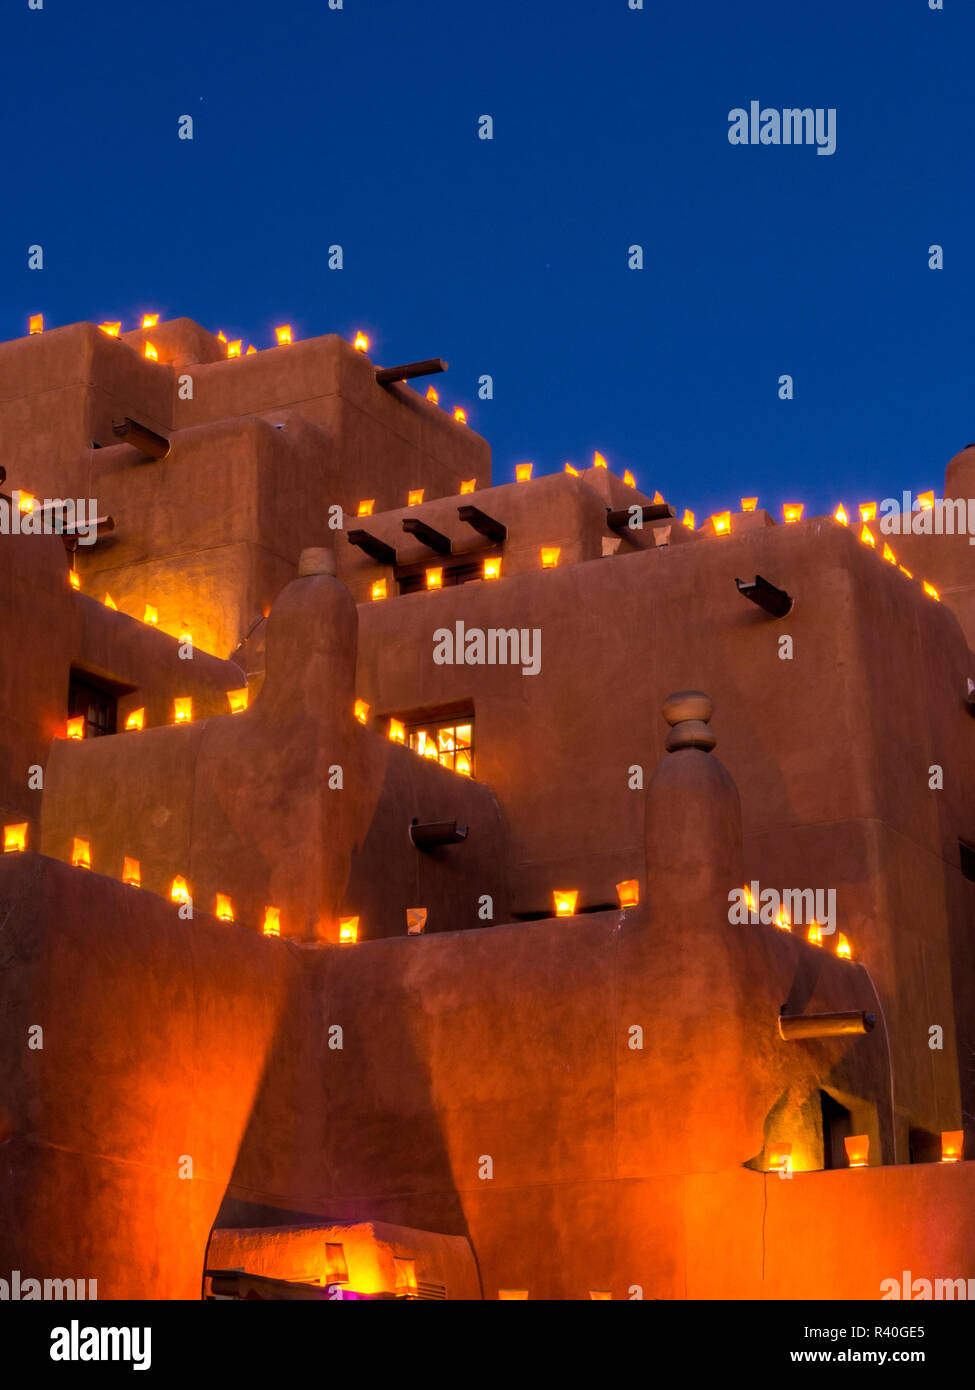 USA, New Mexico, Sant Fe, Adobe structure with protruding vigas and Soft Lights Stock Photo